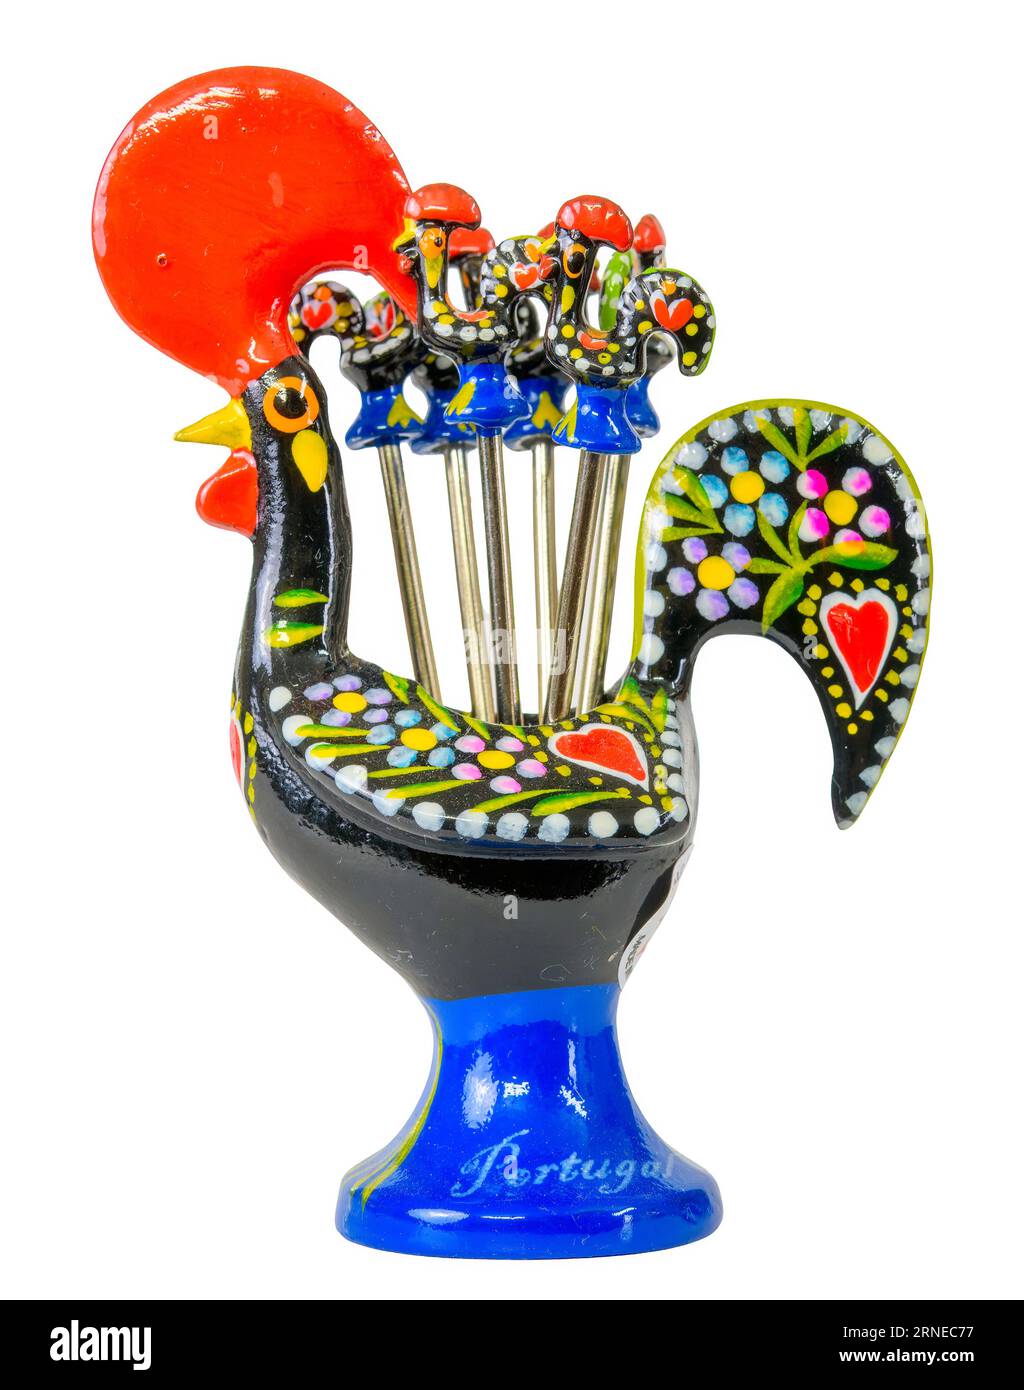 A ceramic souvenir in the shape of a rooster with toothpicks. Portuguese culture traditional symbol Stock Photo